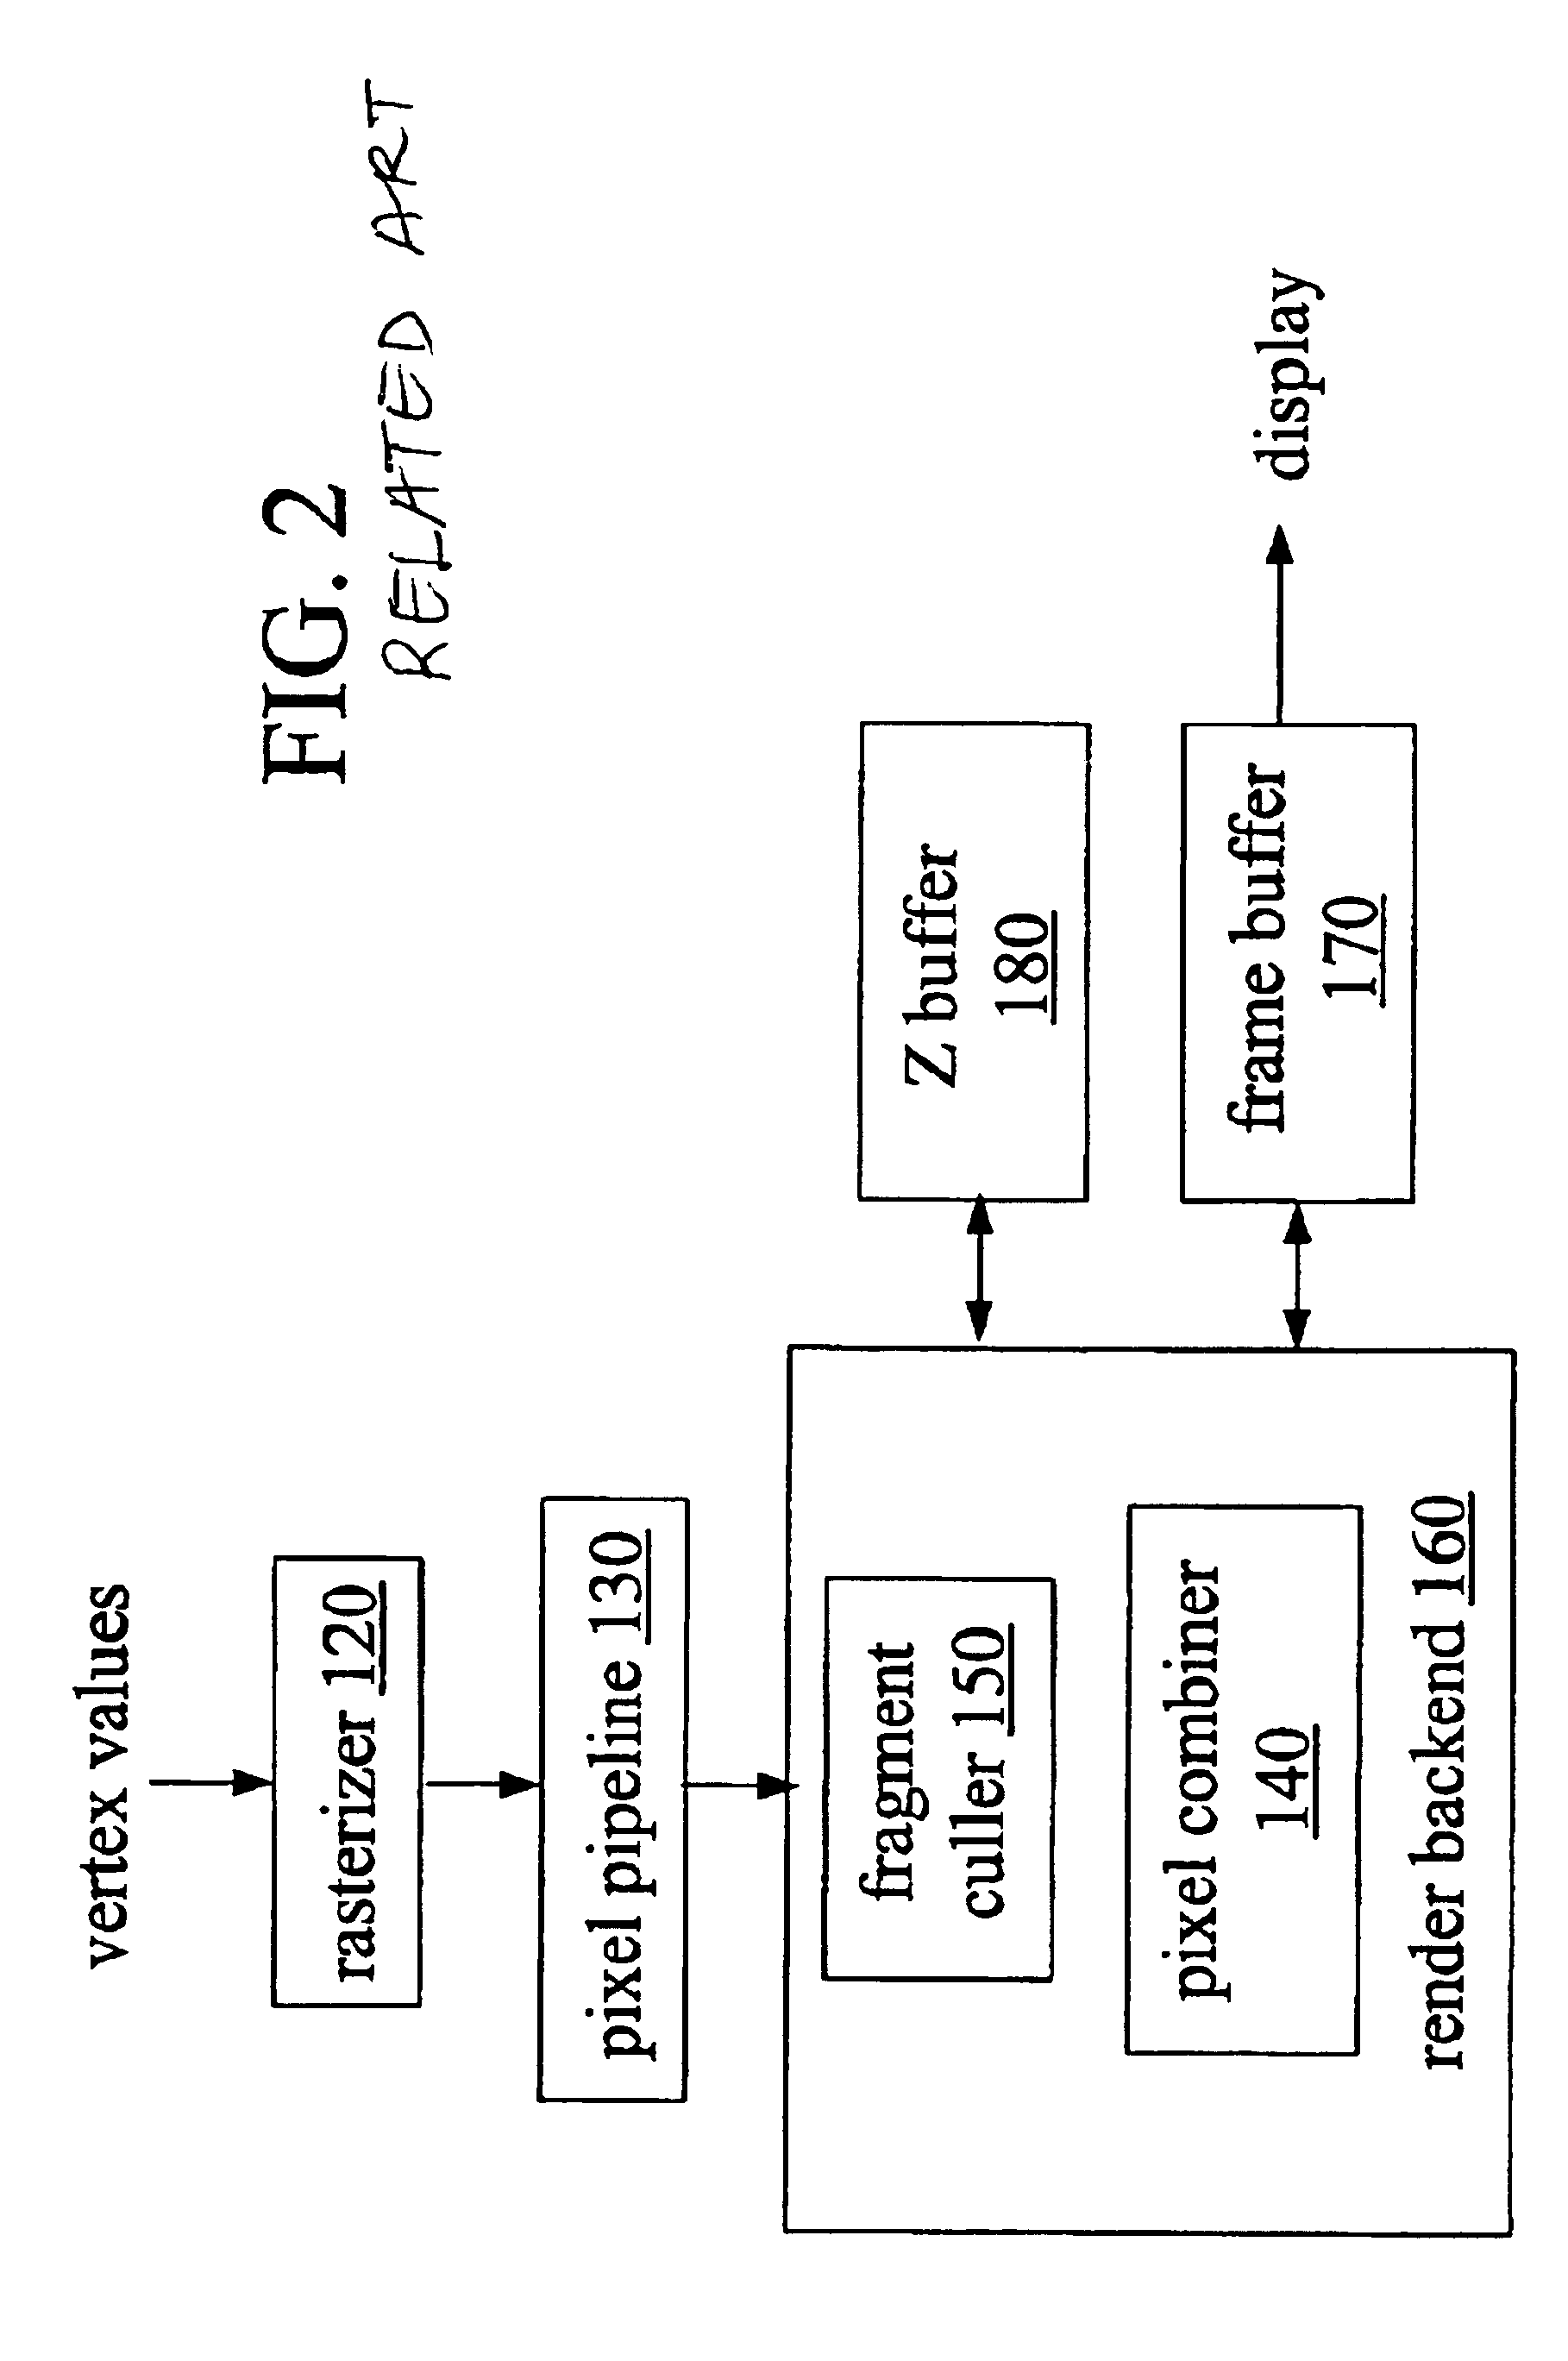 System, method, and apparatus for early culling